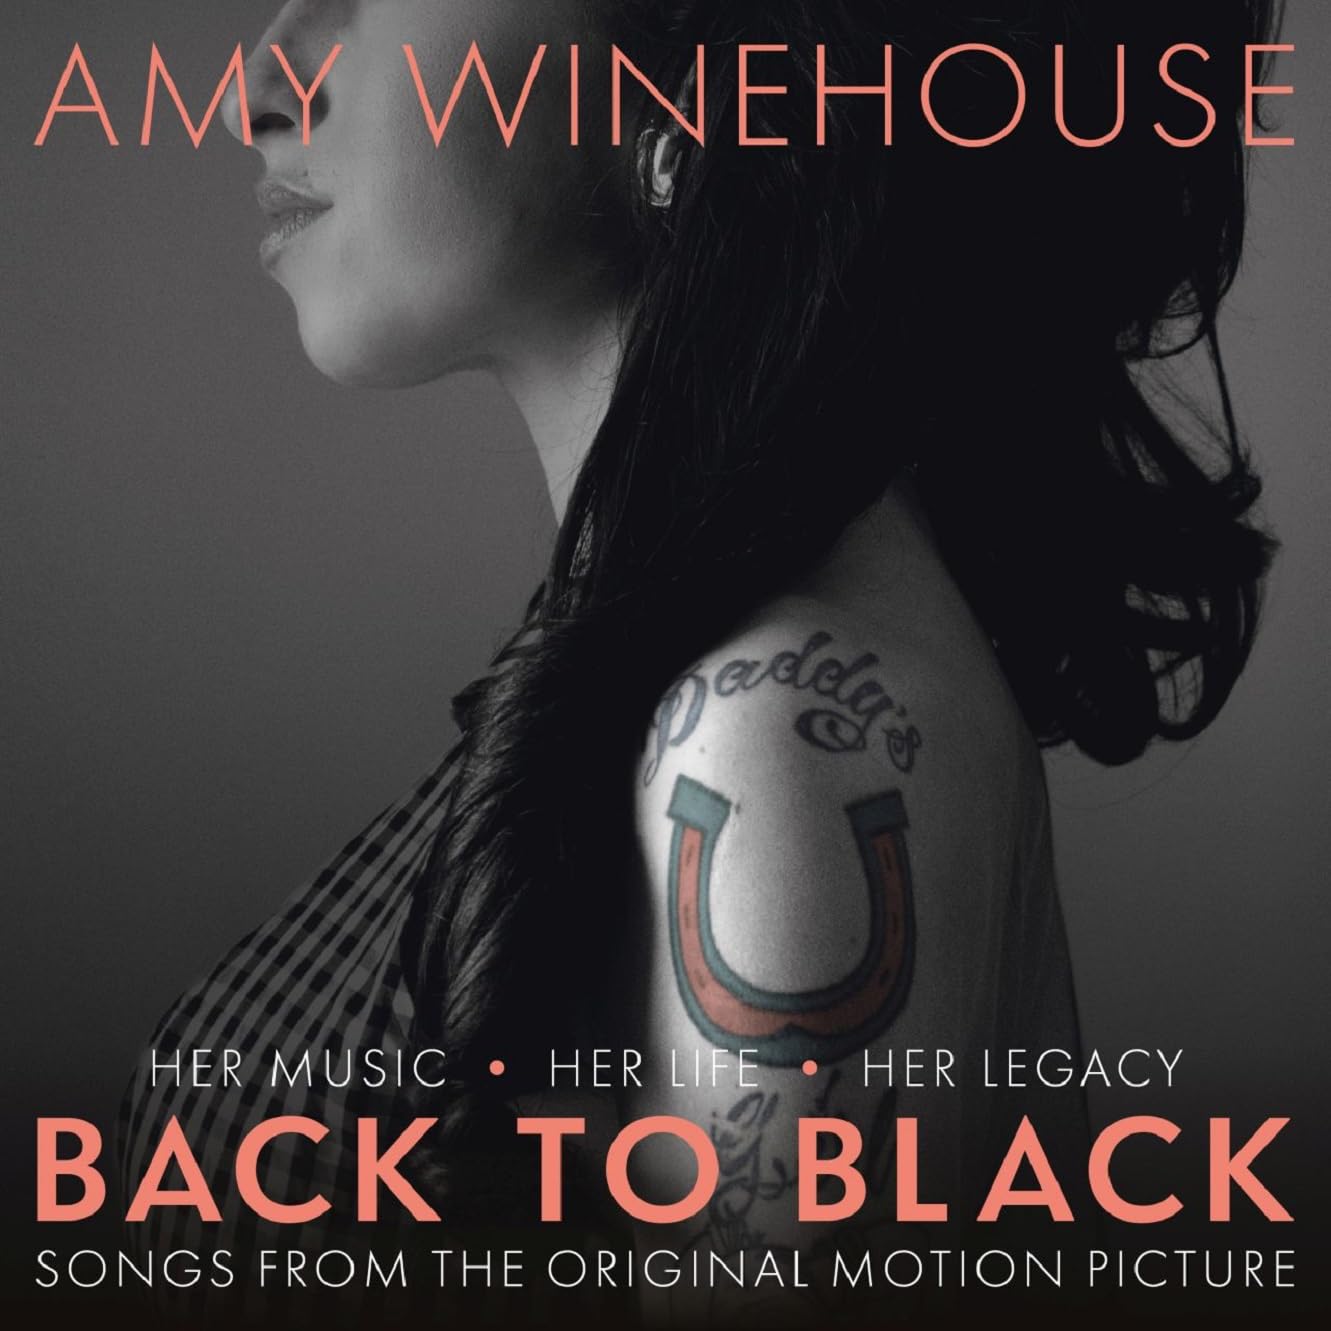 EAN : 0600753997451 - Back To Black : Songs From The Original Motion Picture Édition Limitée